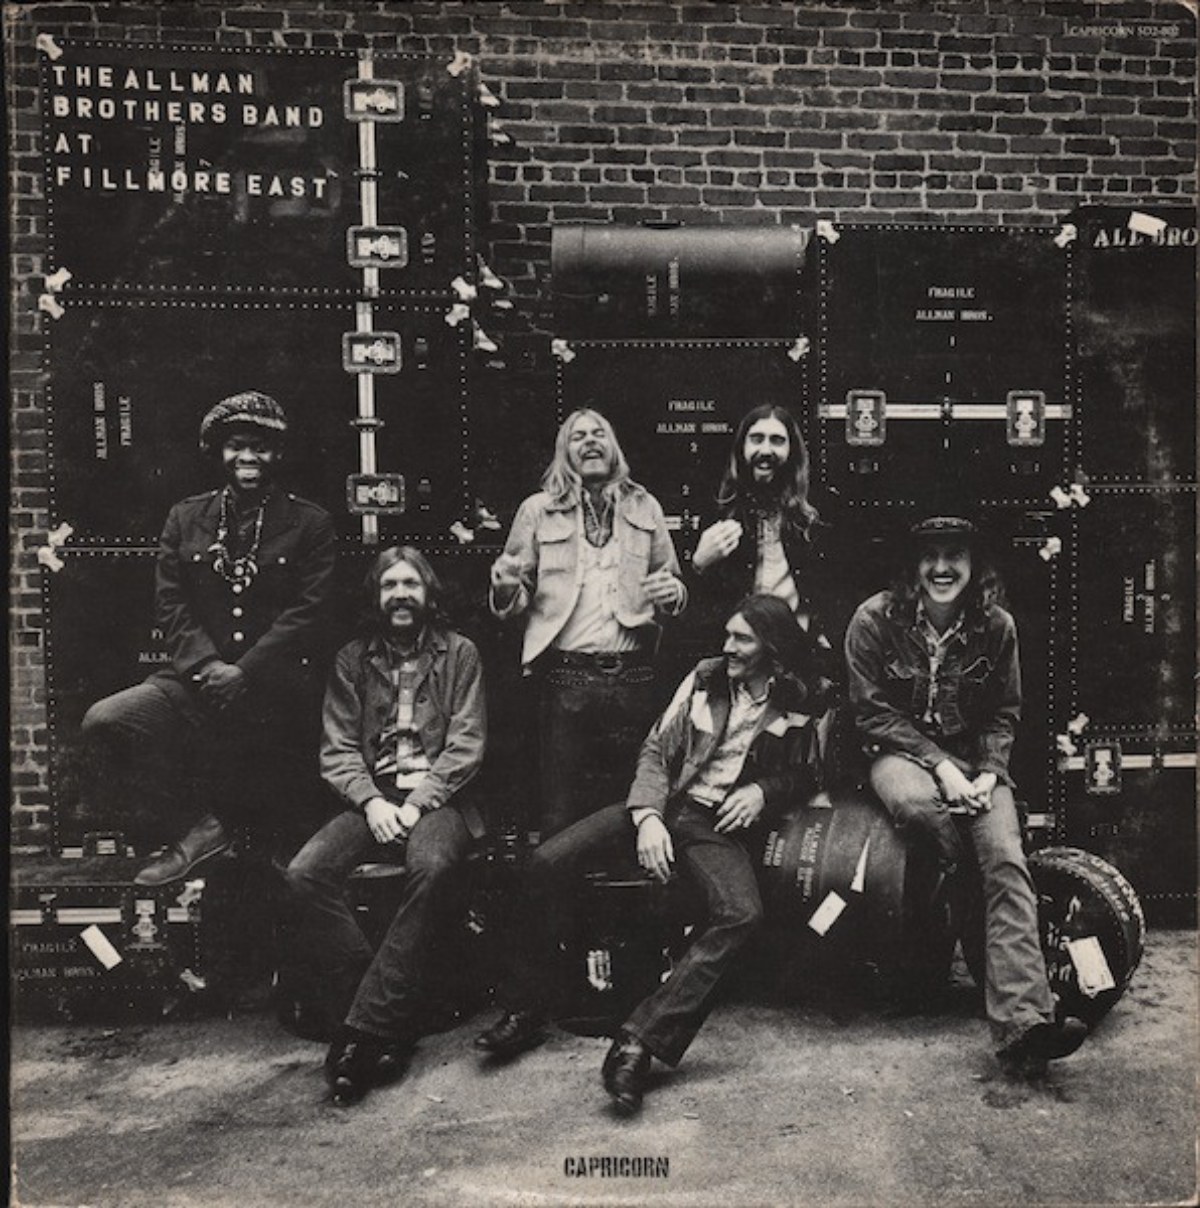 The Allman Brothers Band - Im Fillmore East (1971)